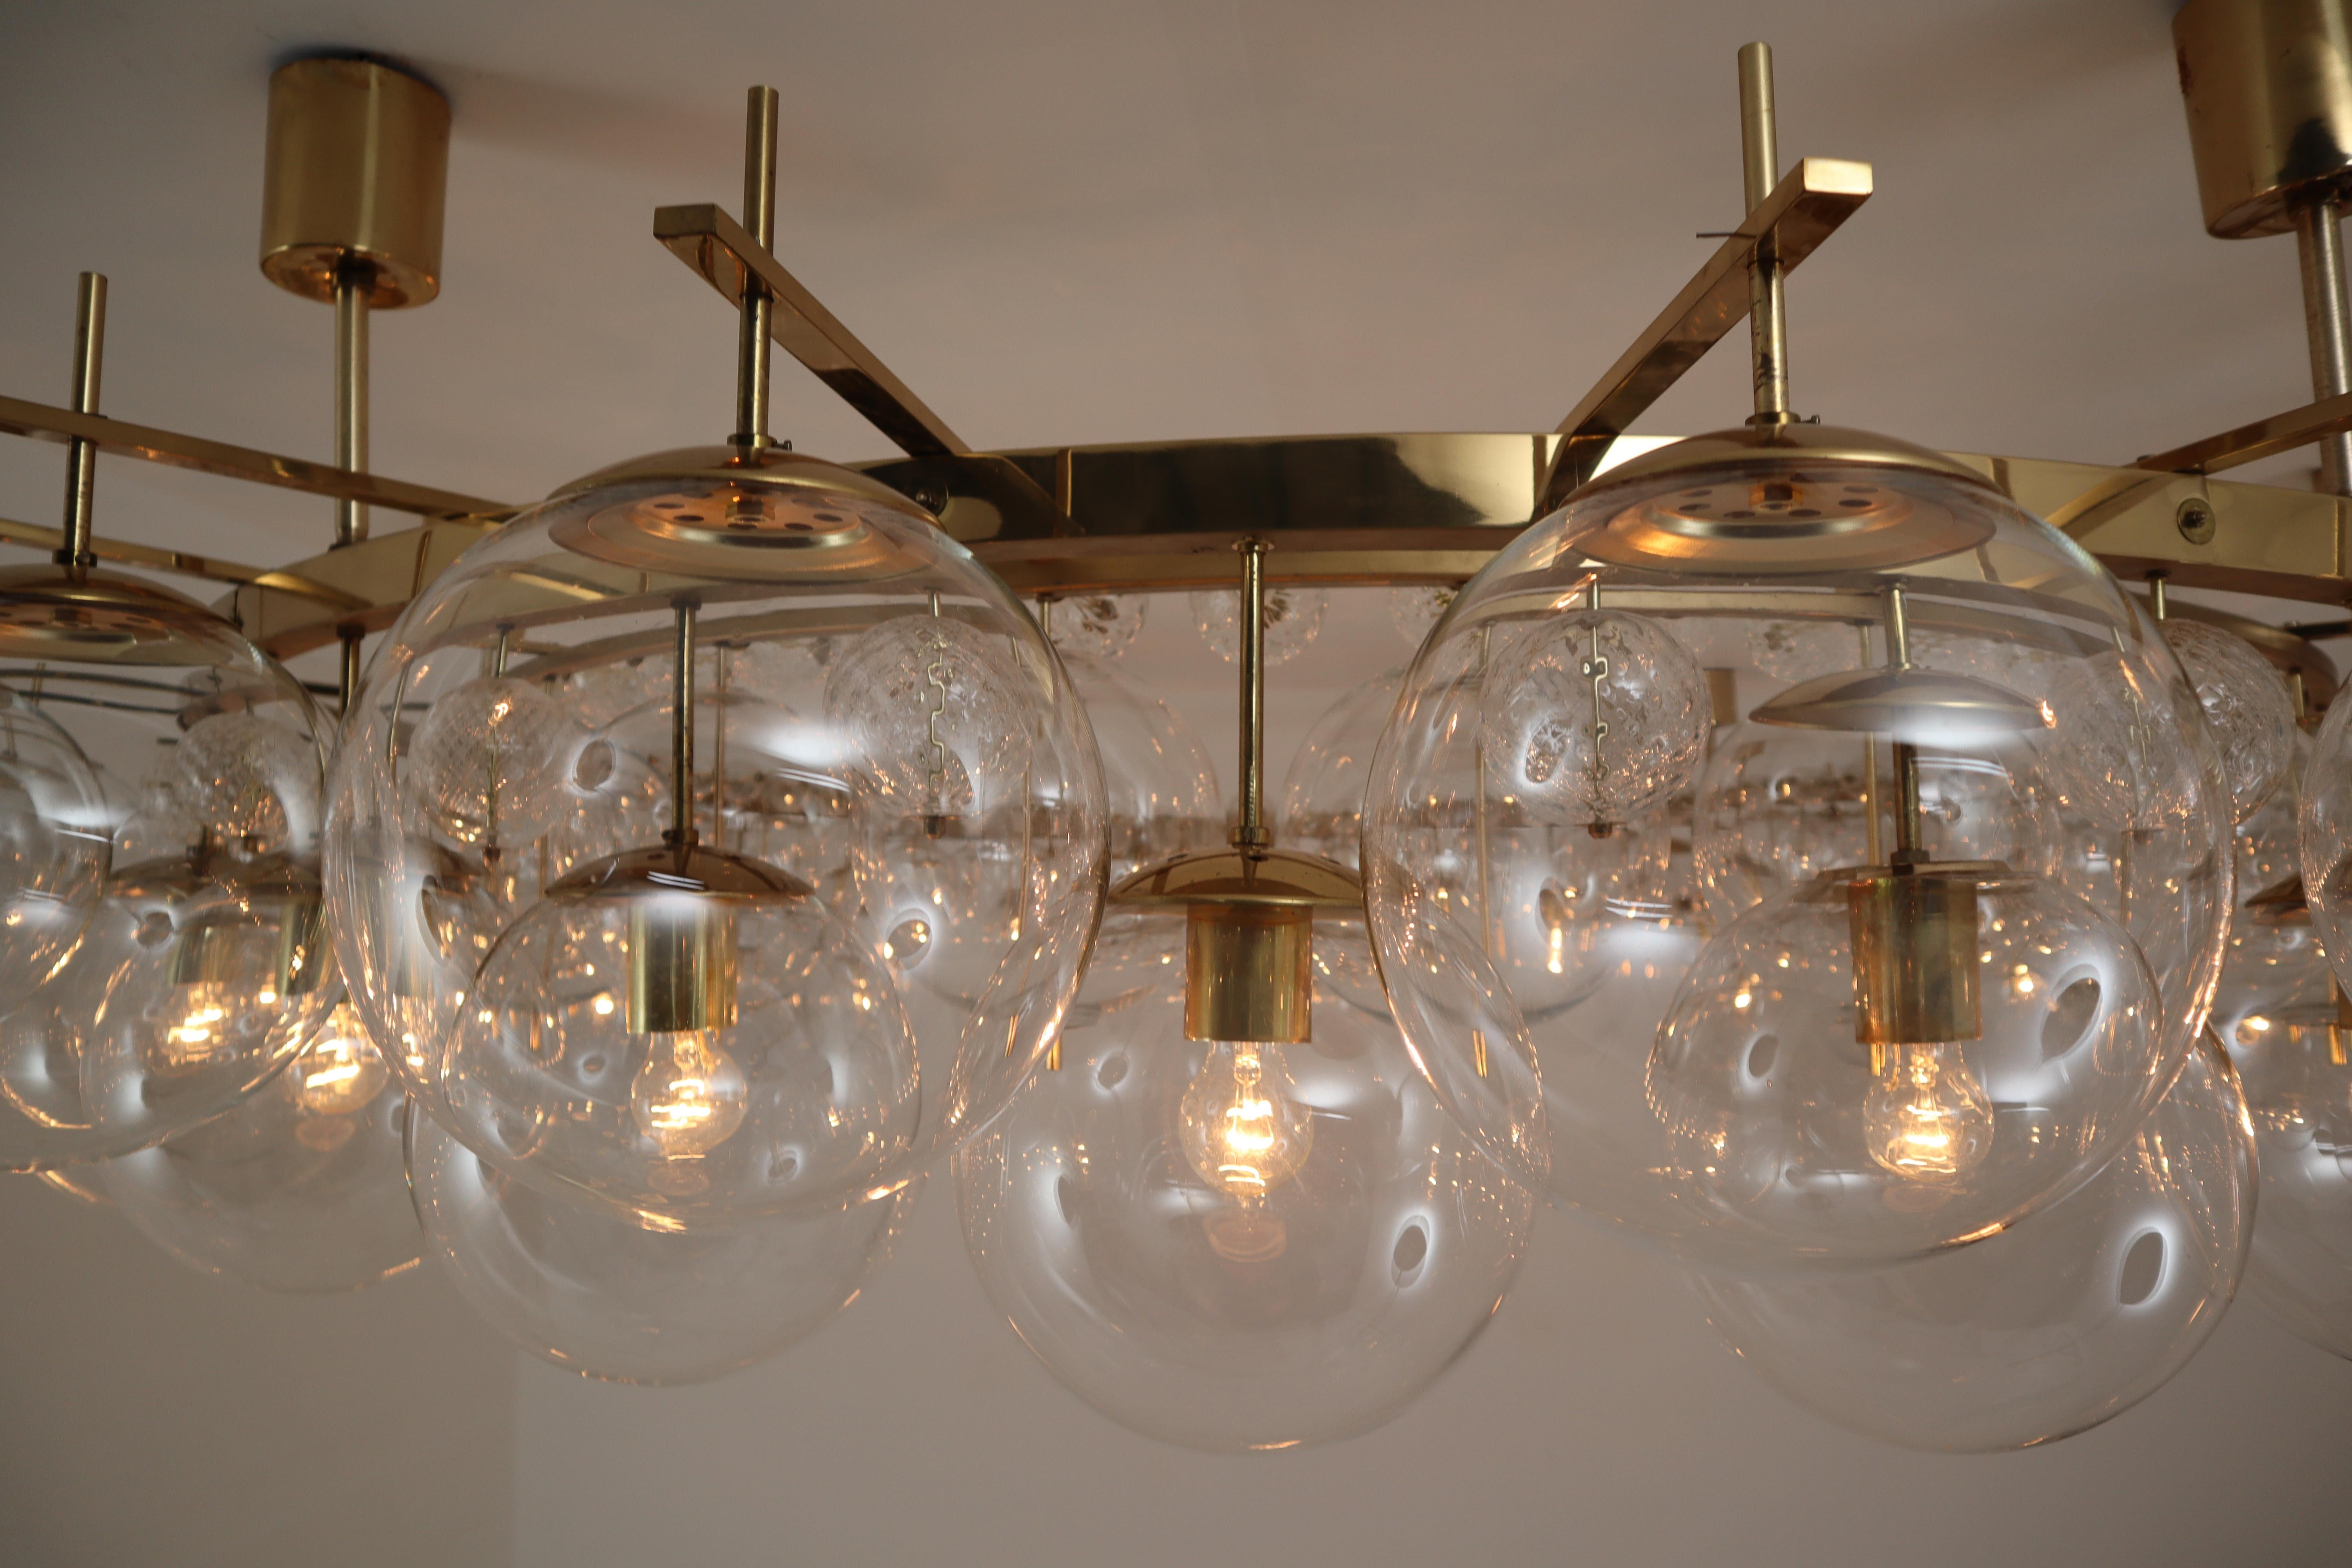 Two Extremely Large Hotel Chandeliers with Brass Fixture and Hand-Blowed Glass 1